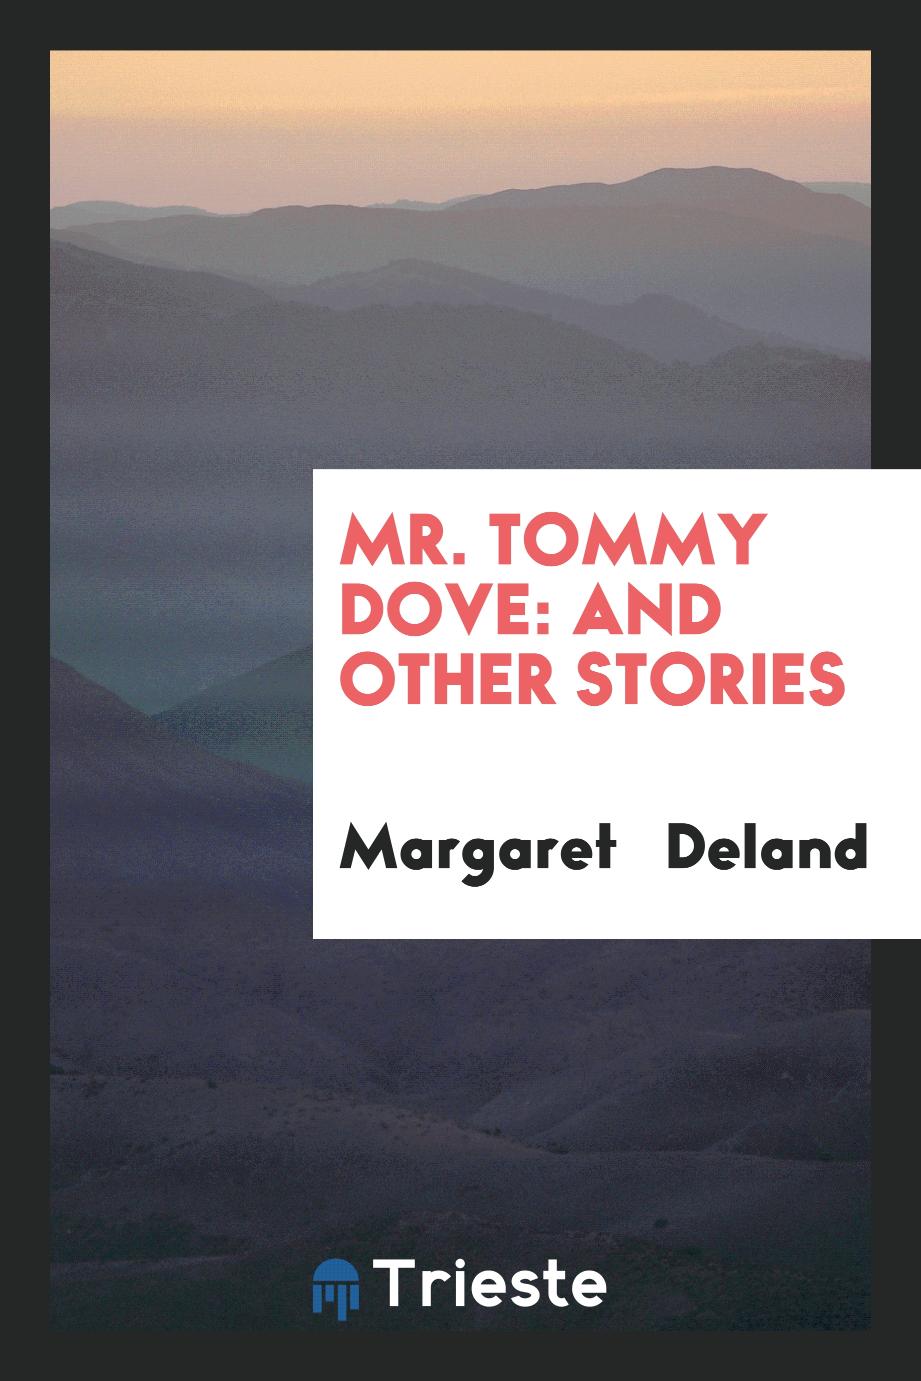 Mr. Tommy Dove: And Other Stories